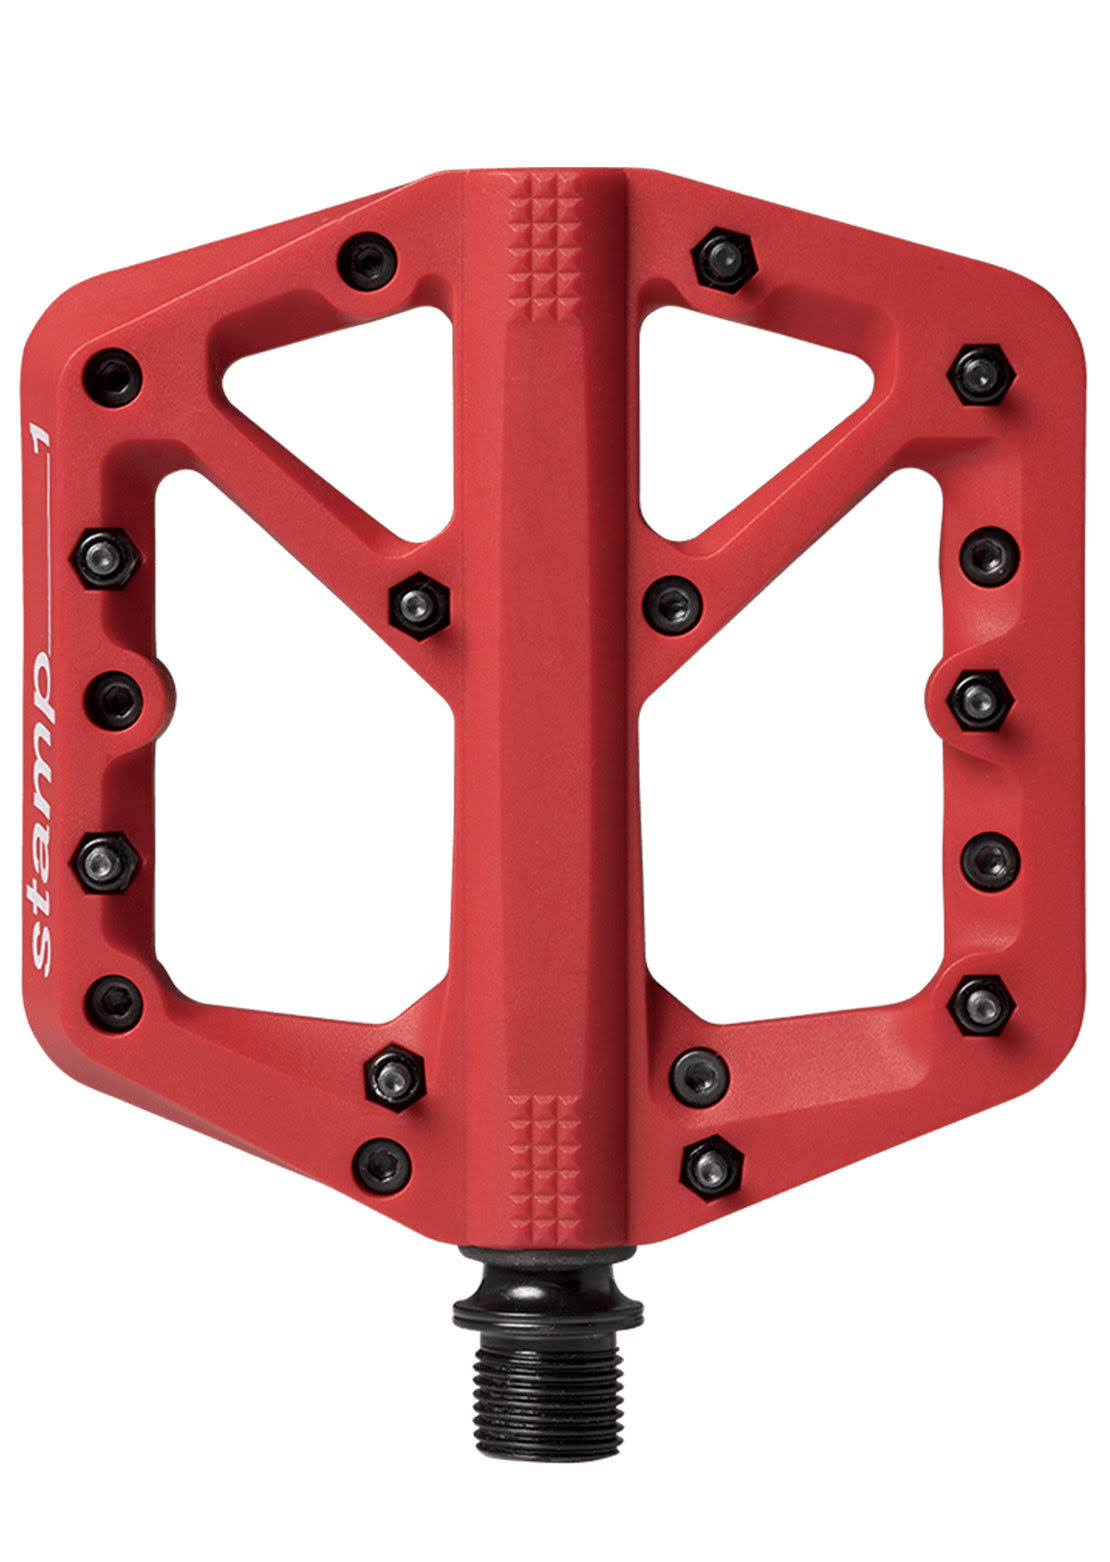 Crank Brothers Stamp Pedal - Red, Small